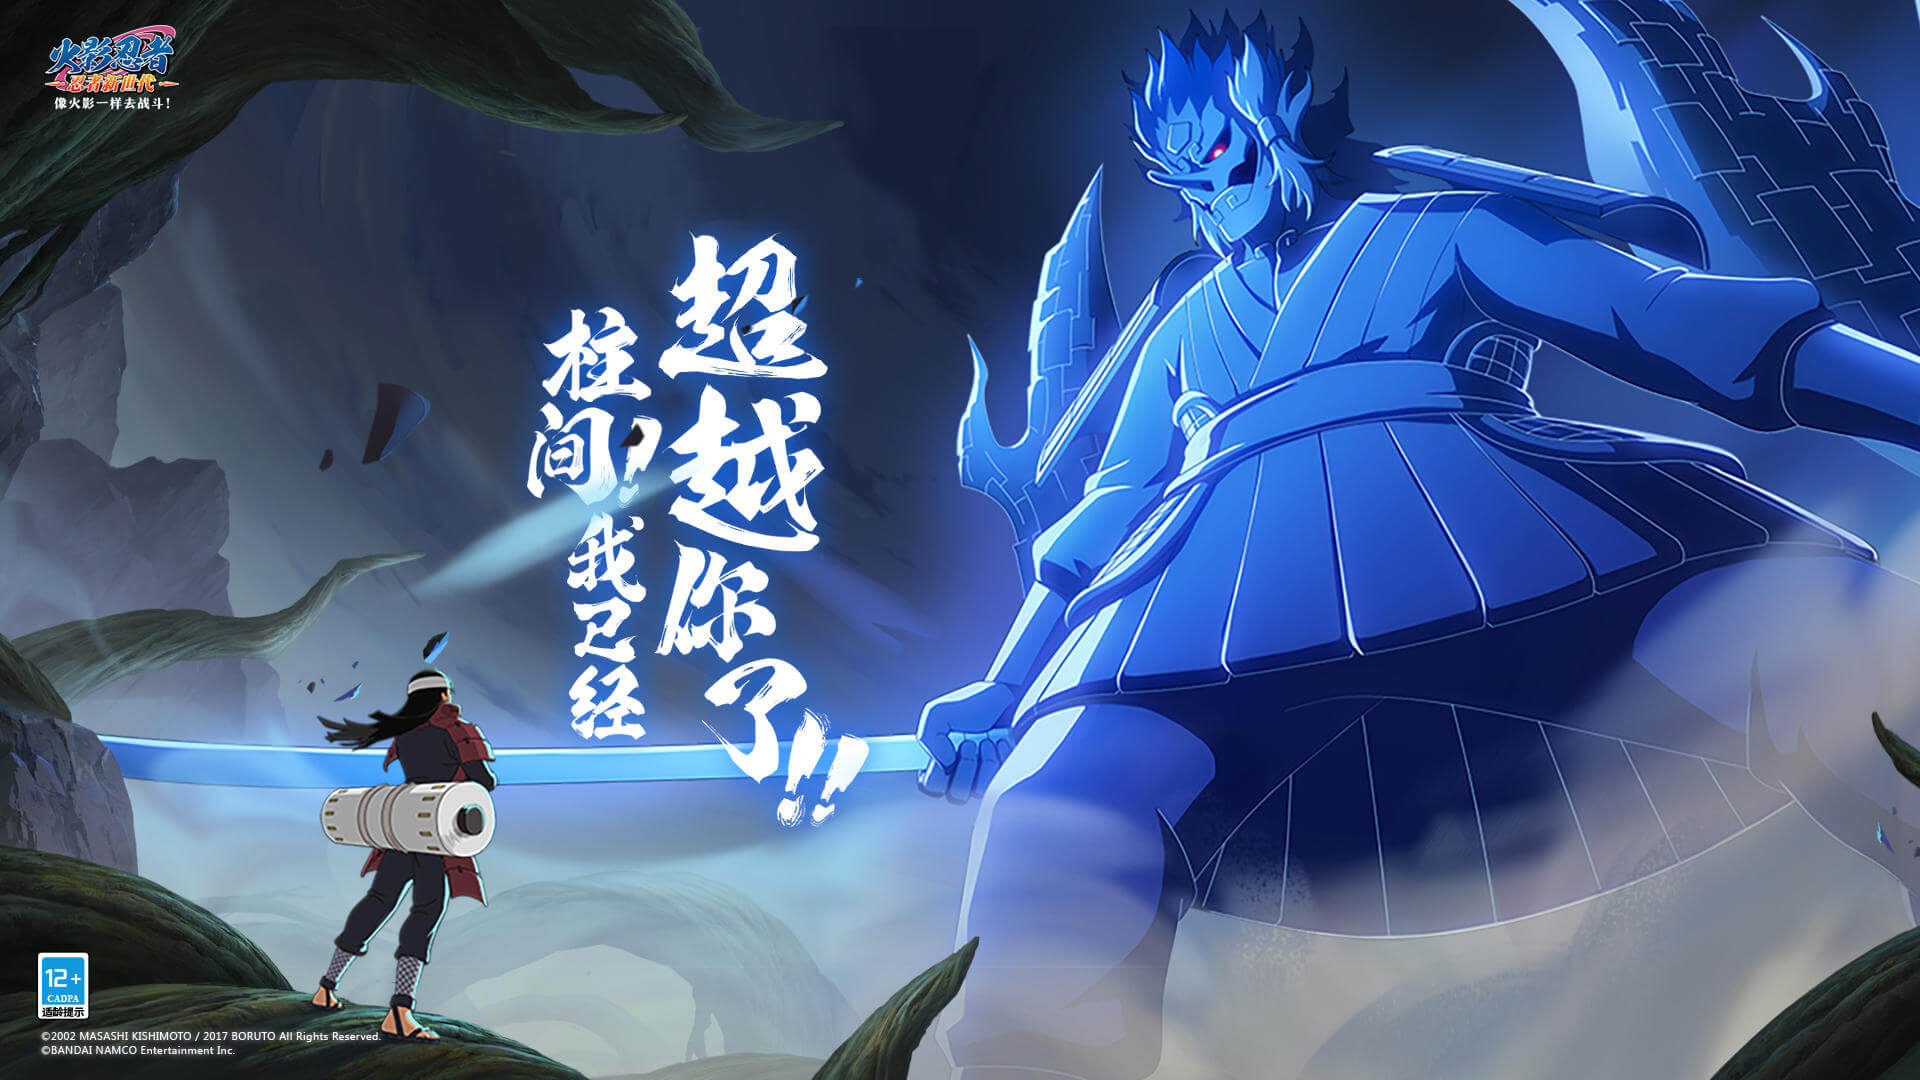 Naruto Online Mobile  APK (by Tencent) Download